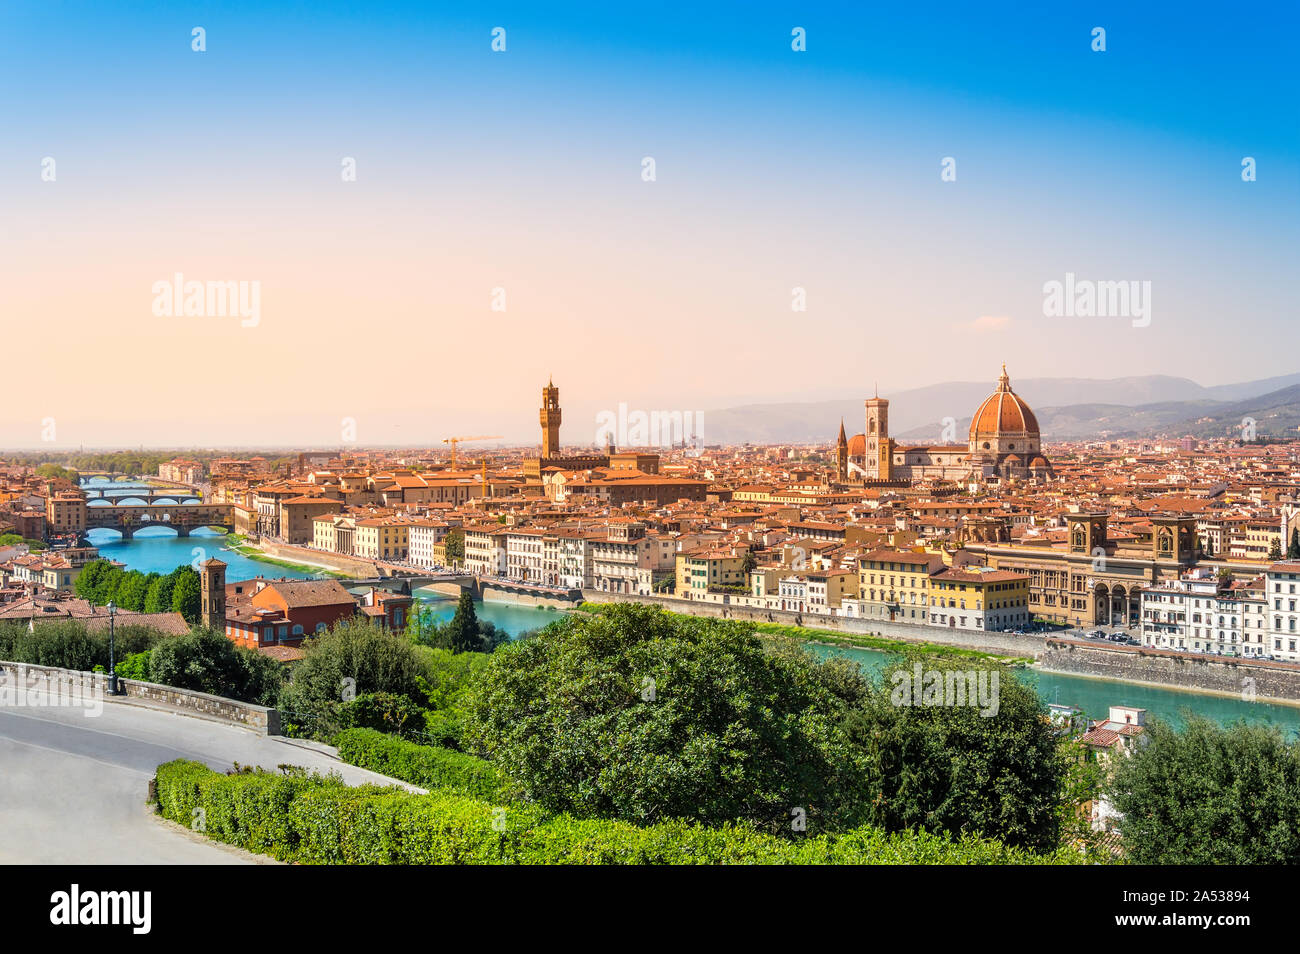 Florence, Italy: view on Florence old town and skyline with Cathedral of Santa Maria del Fiore, Palazzo Vecchio and Arno river with Ponte Vecchio from Stock Photo